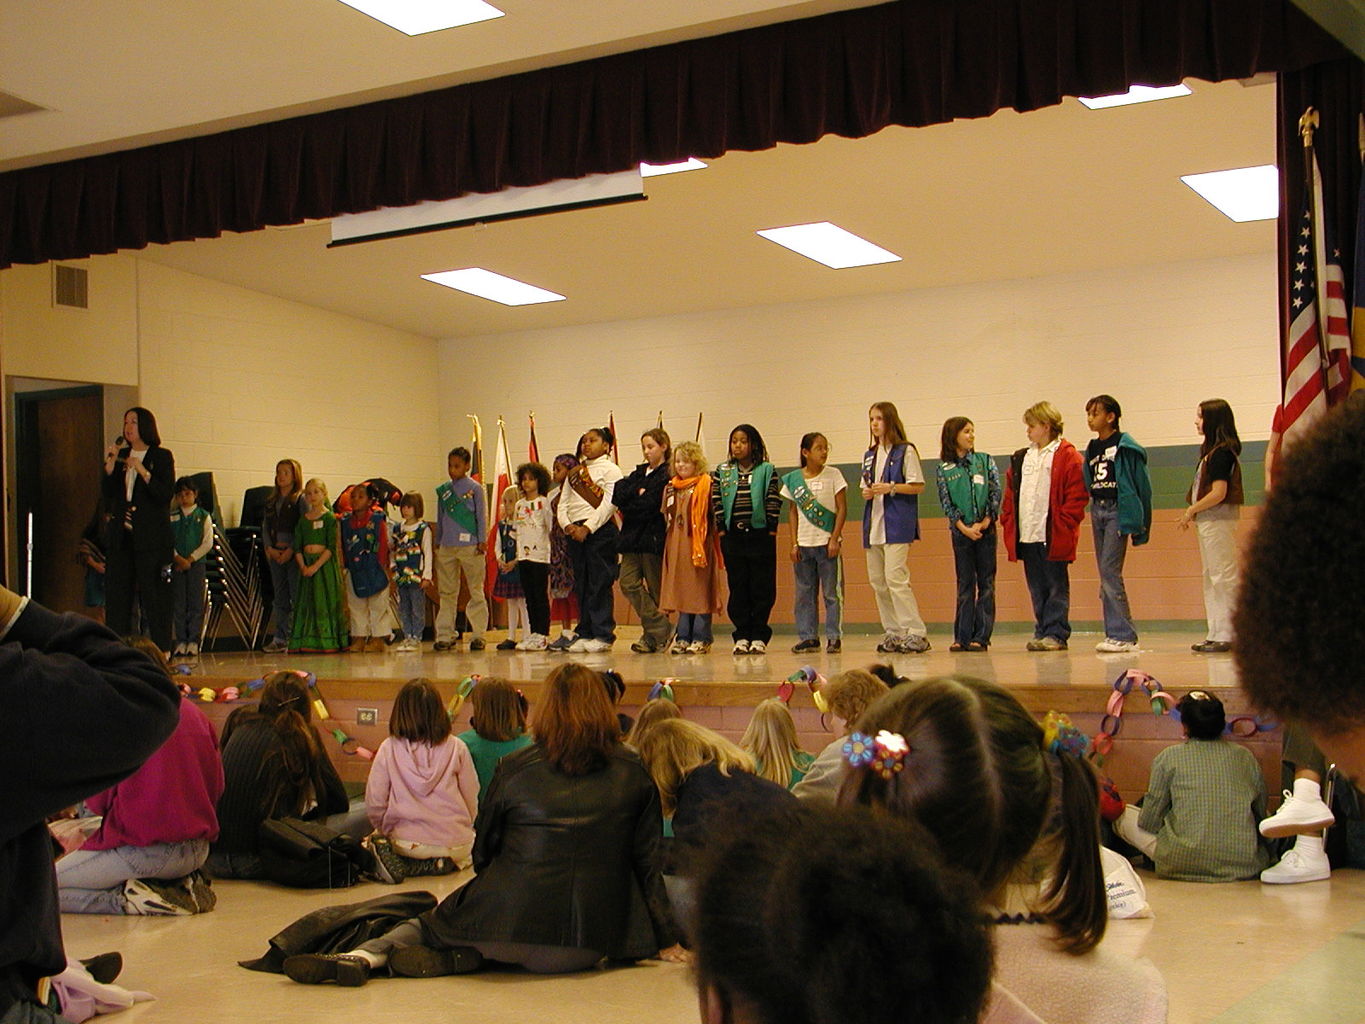 Girl Scouts - Thinking Day
